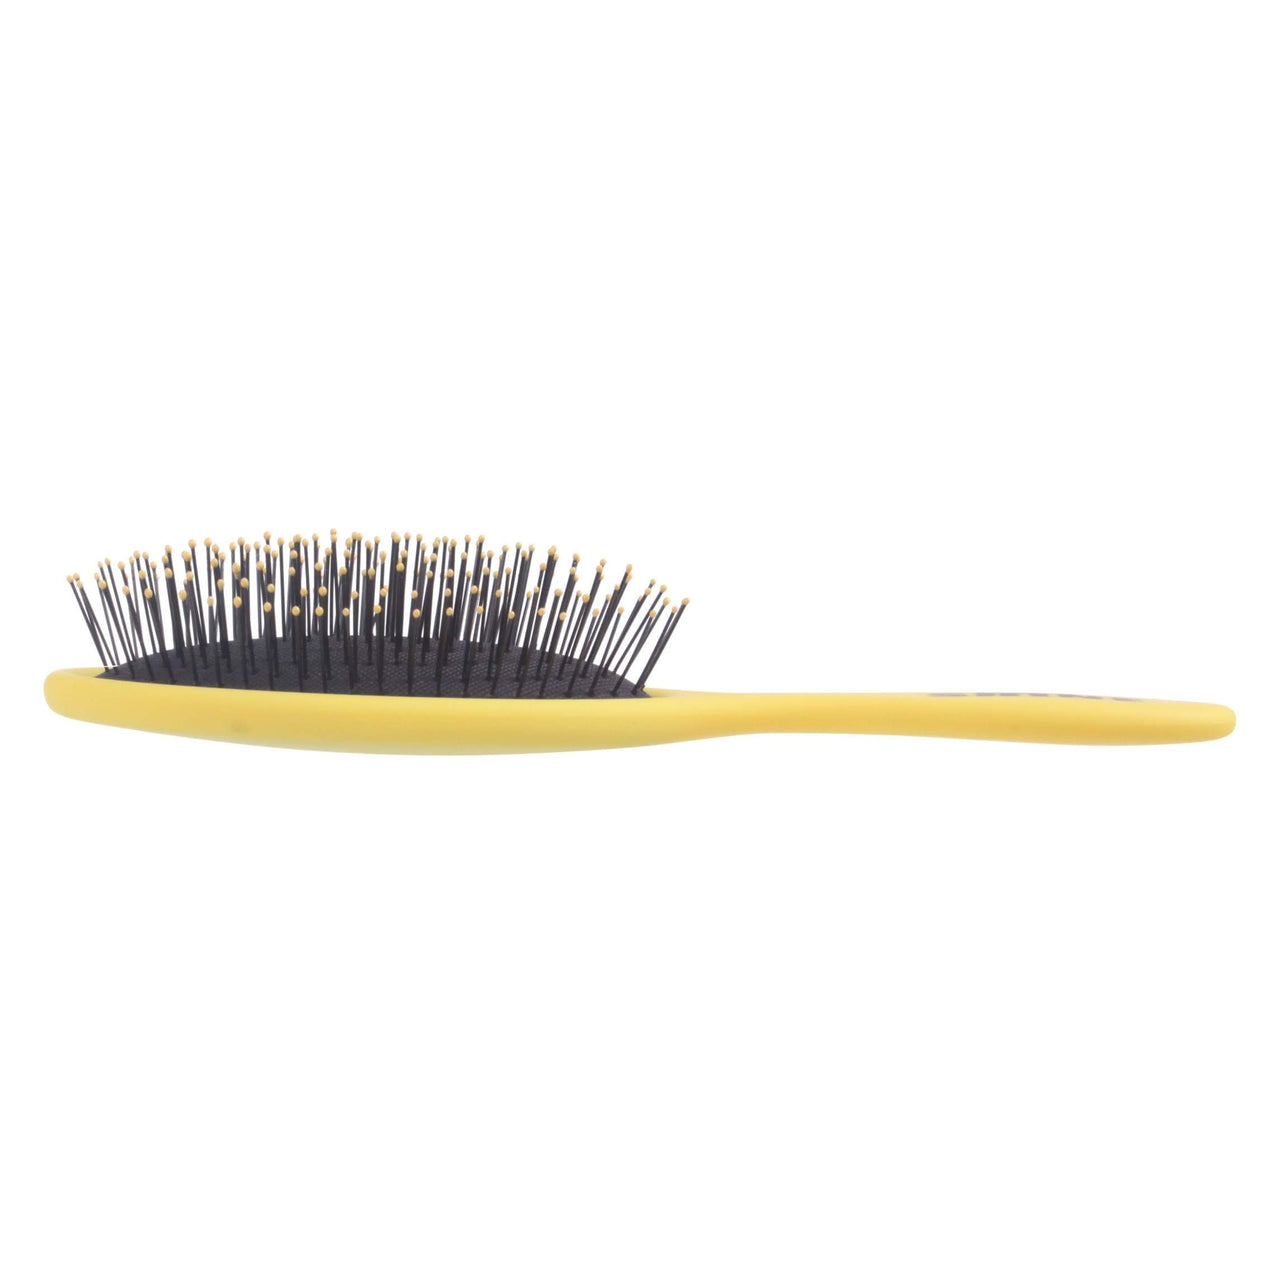 Wet Dry Brush Soft Flexible Bristles Detangles and Smooths with Ease - Yellow